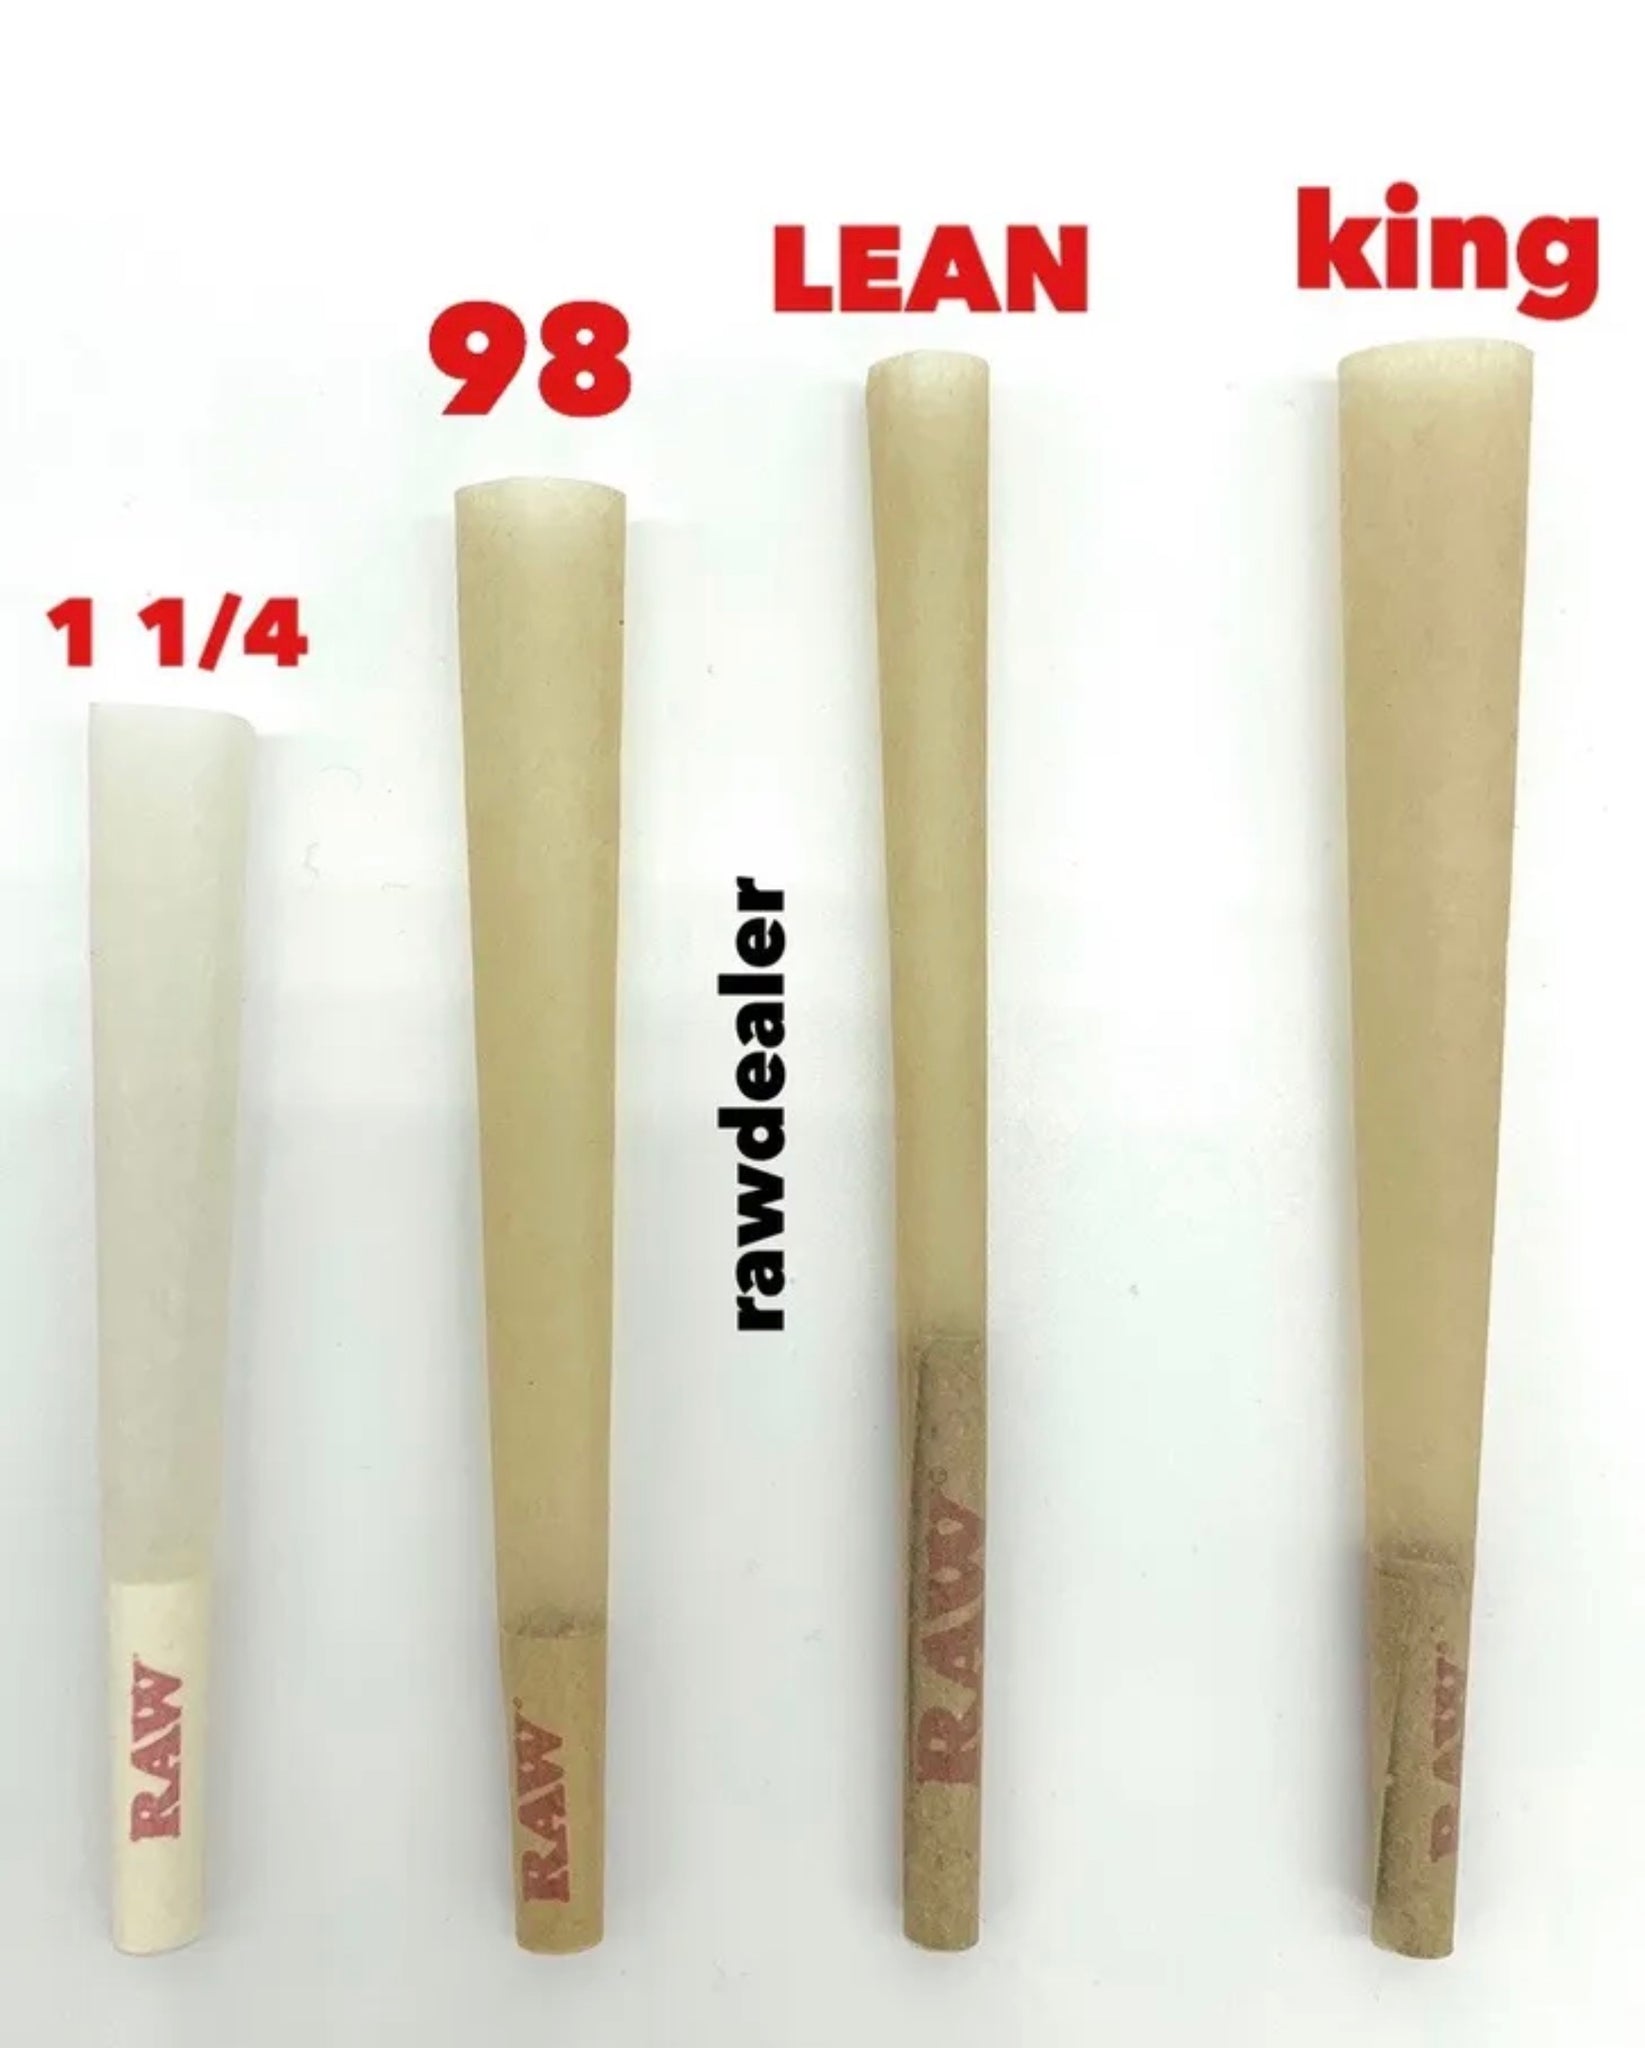 1000 Cones King Size - Cone Pre Roule (109 x 20 mm) - Joint Cones